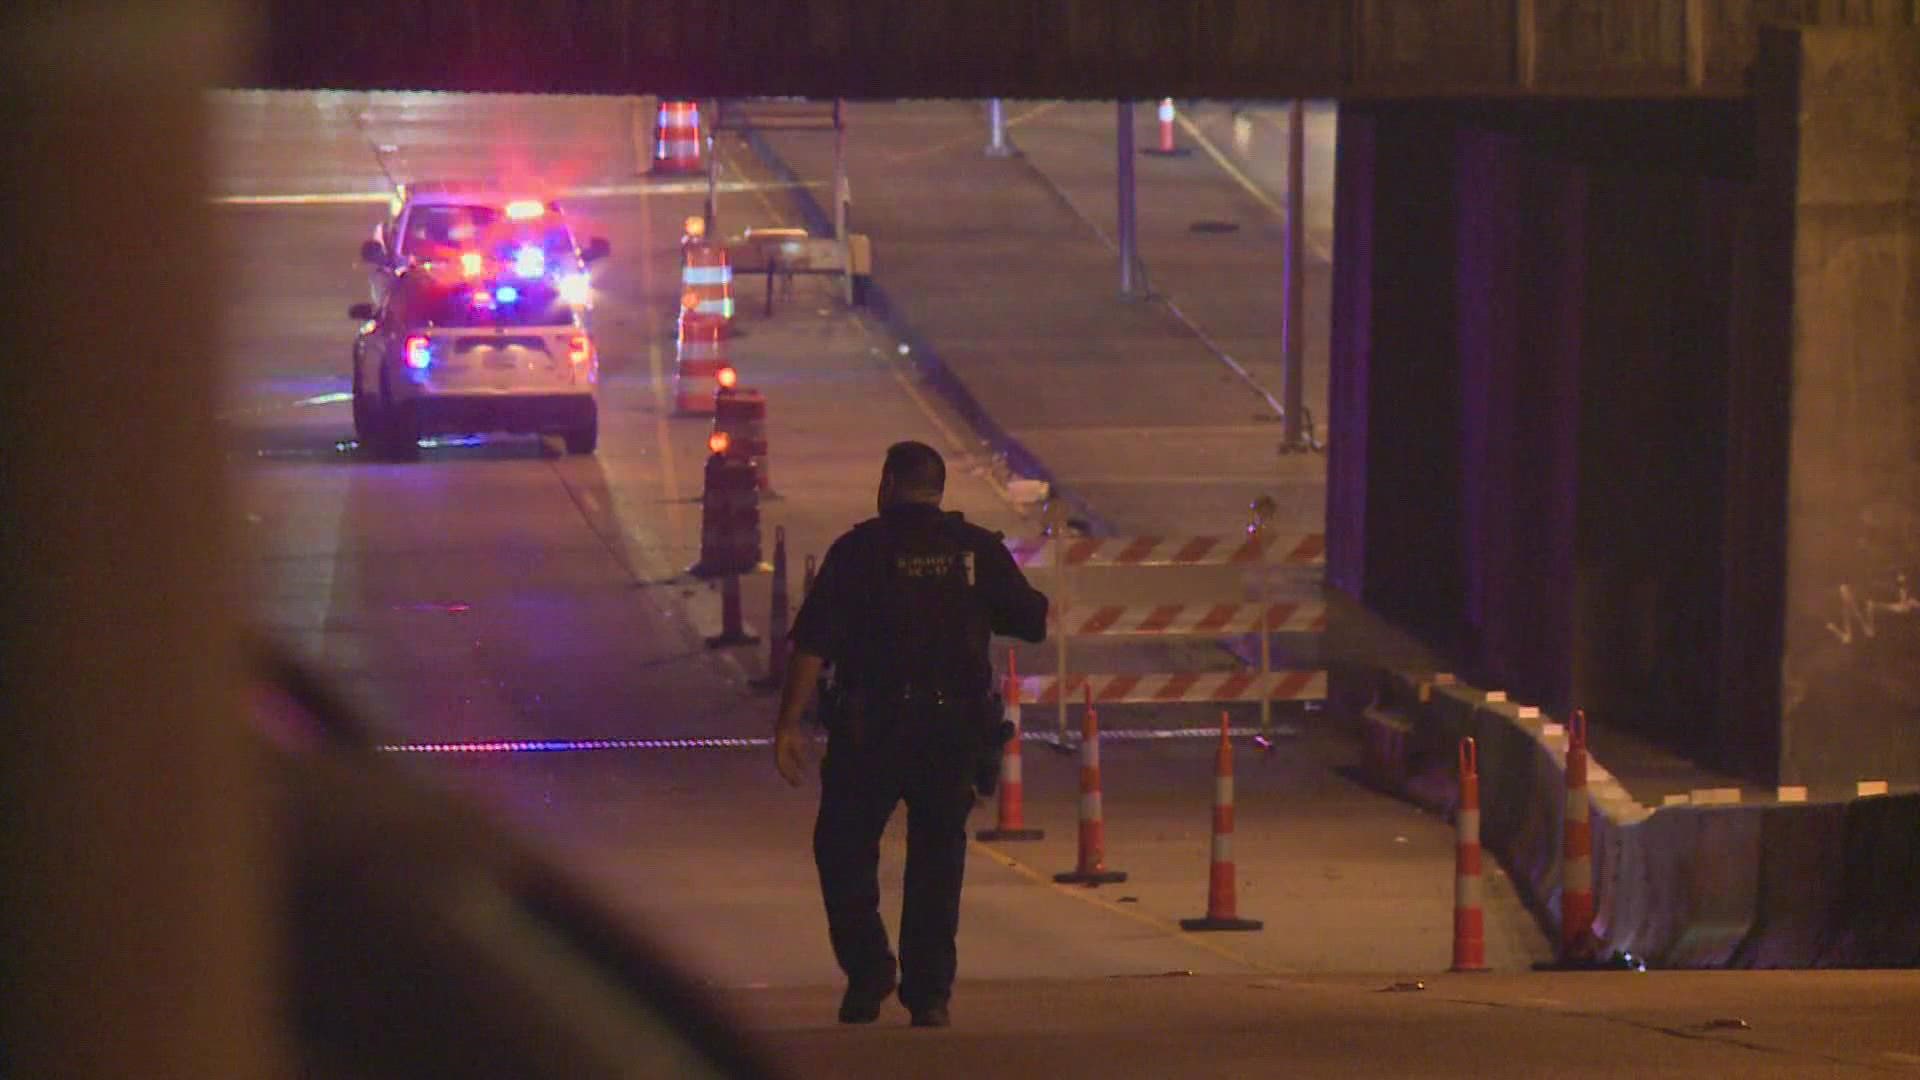 At least one person is dead after a police-involved shooting took place on Airline Highway late Sunday night.